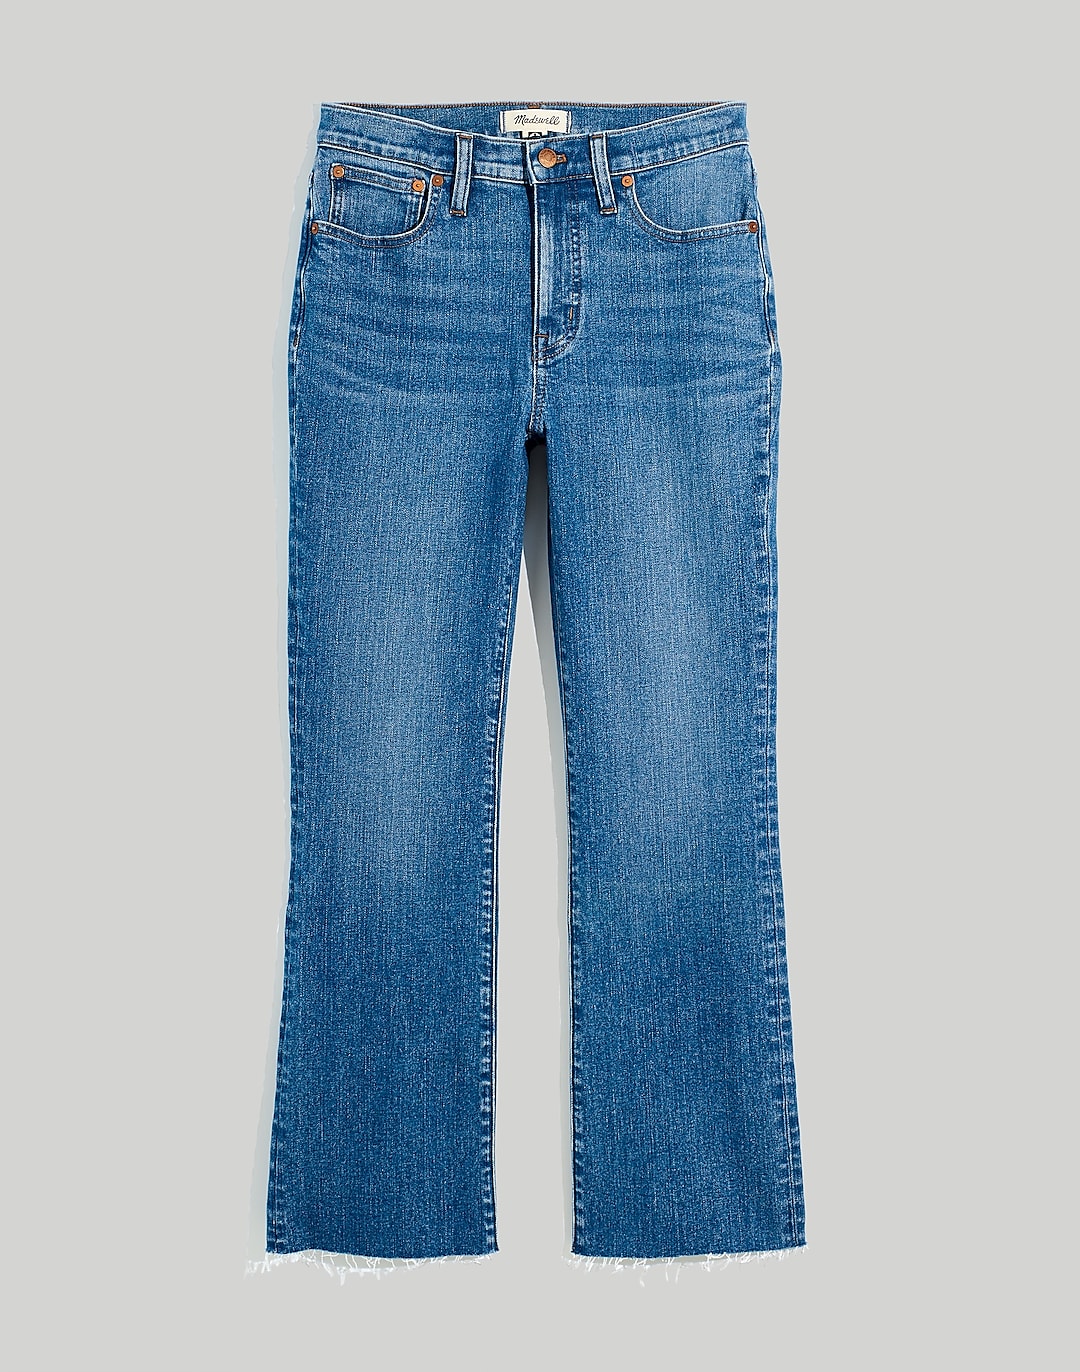 Kick Out Crop Jeans in Cherryville Wash: Raw-Hem Edition | Madewell